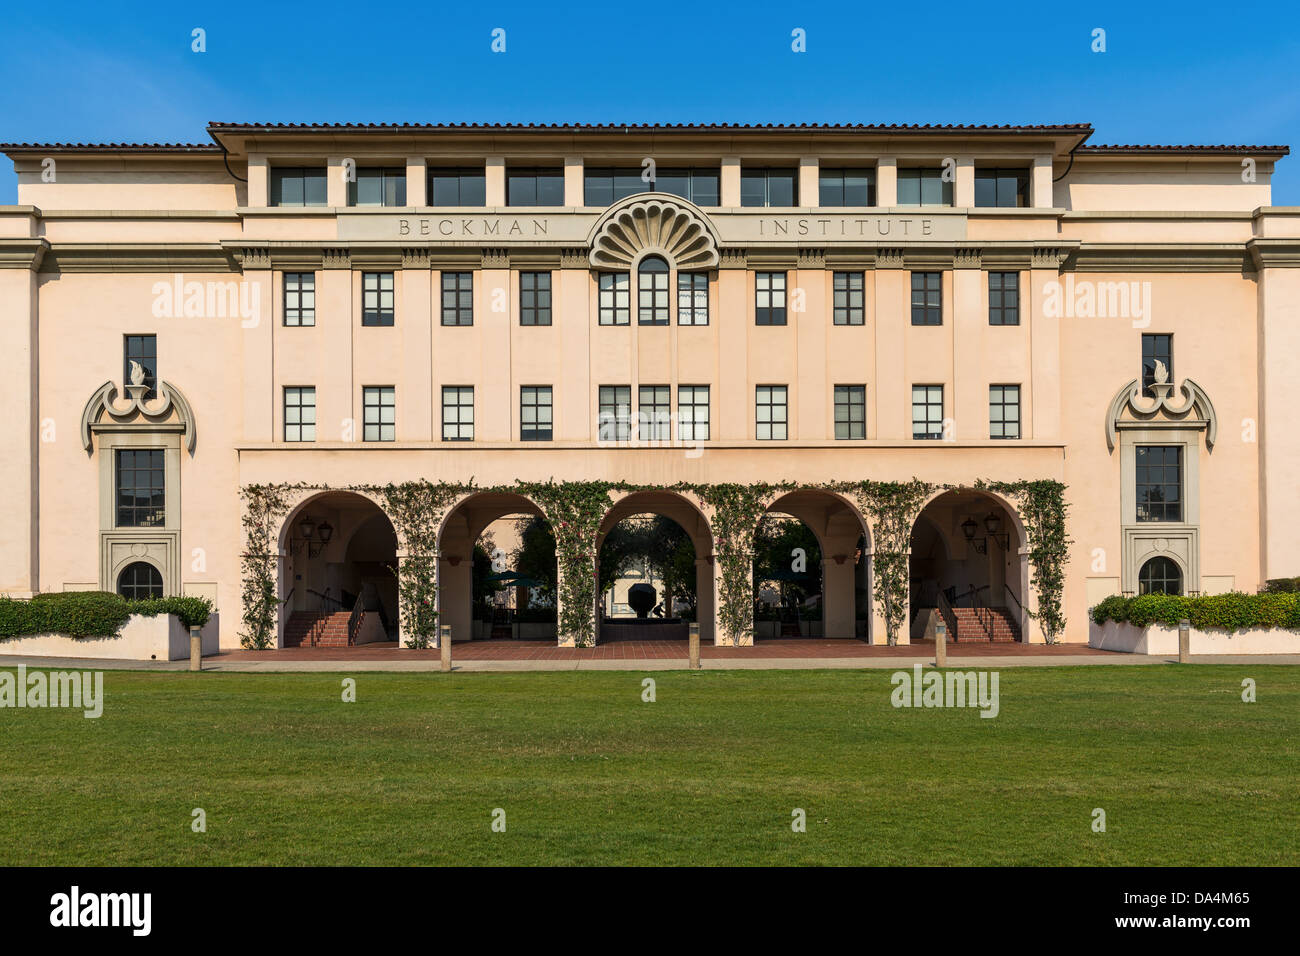 The Beckman Institute at Caltech, the California Institute of Technology. Stock Photo